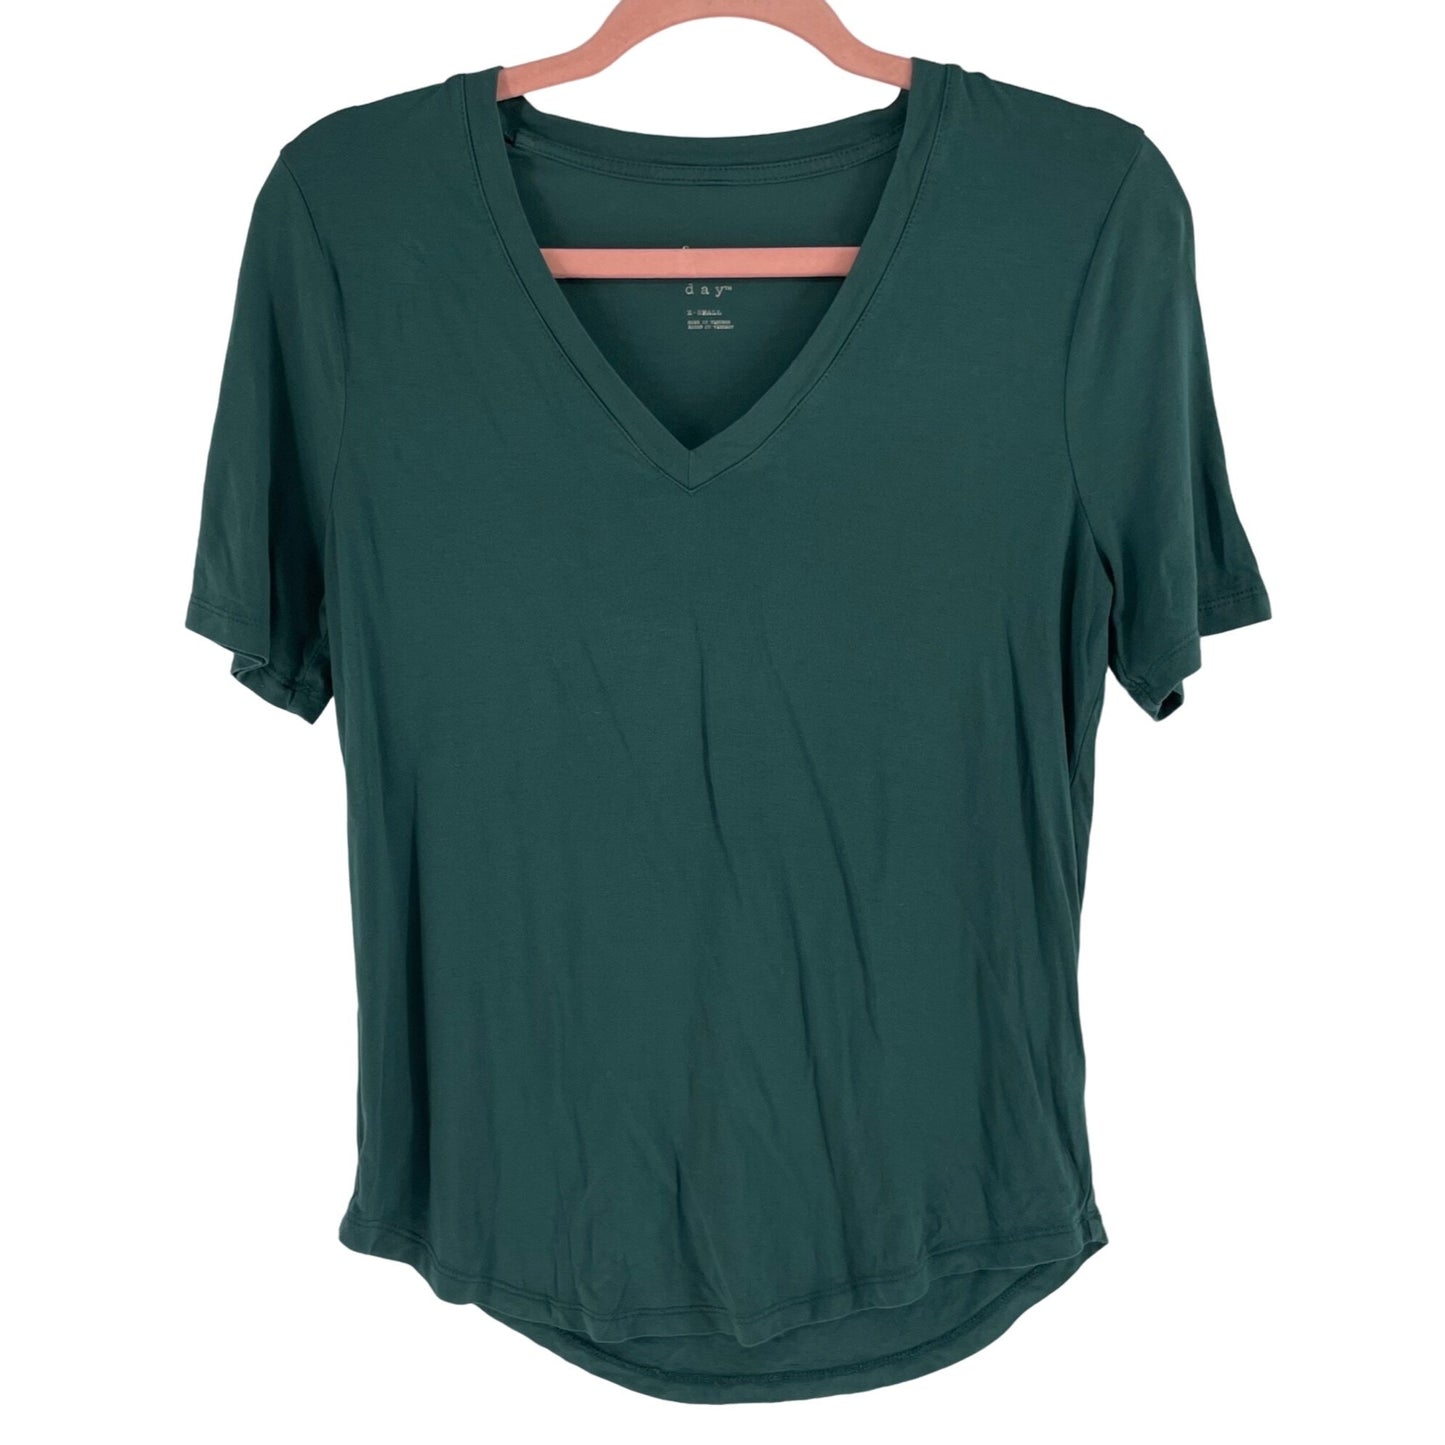 A New Day Women's Size XS V-Neck Forest Green T-Shirt